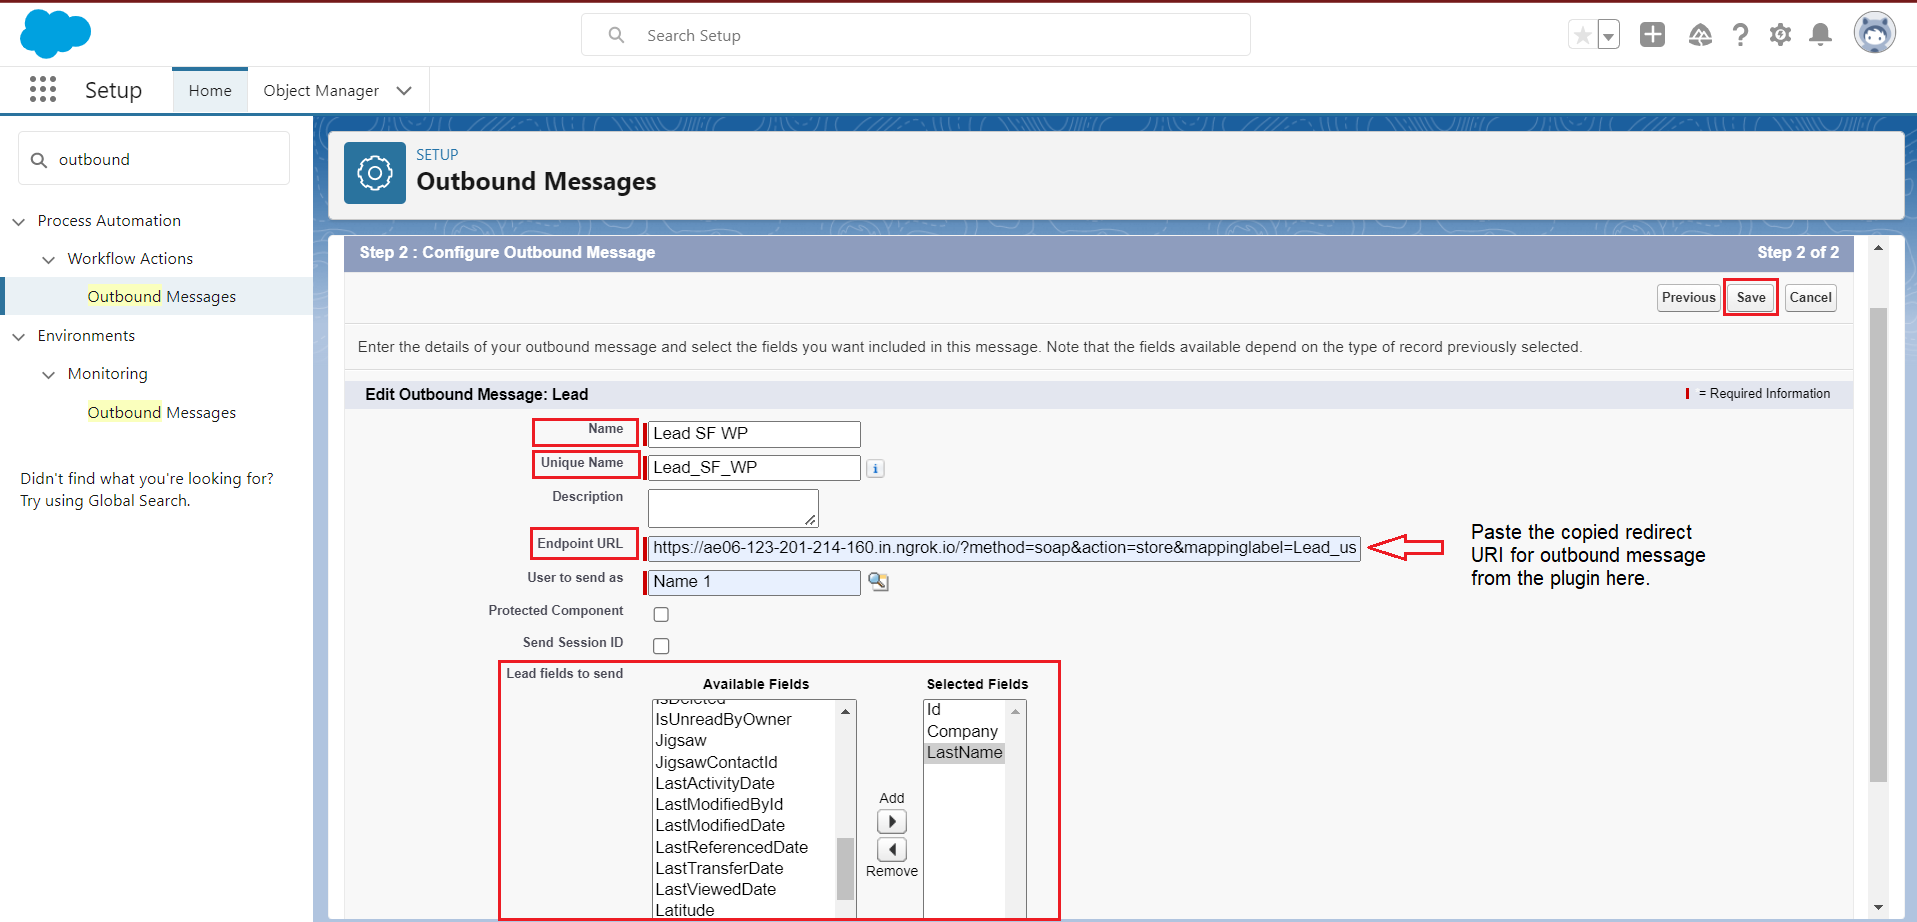  Salesforce to WP real time sync | Outbound message configuration